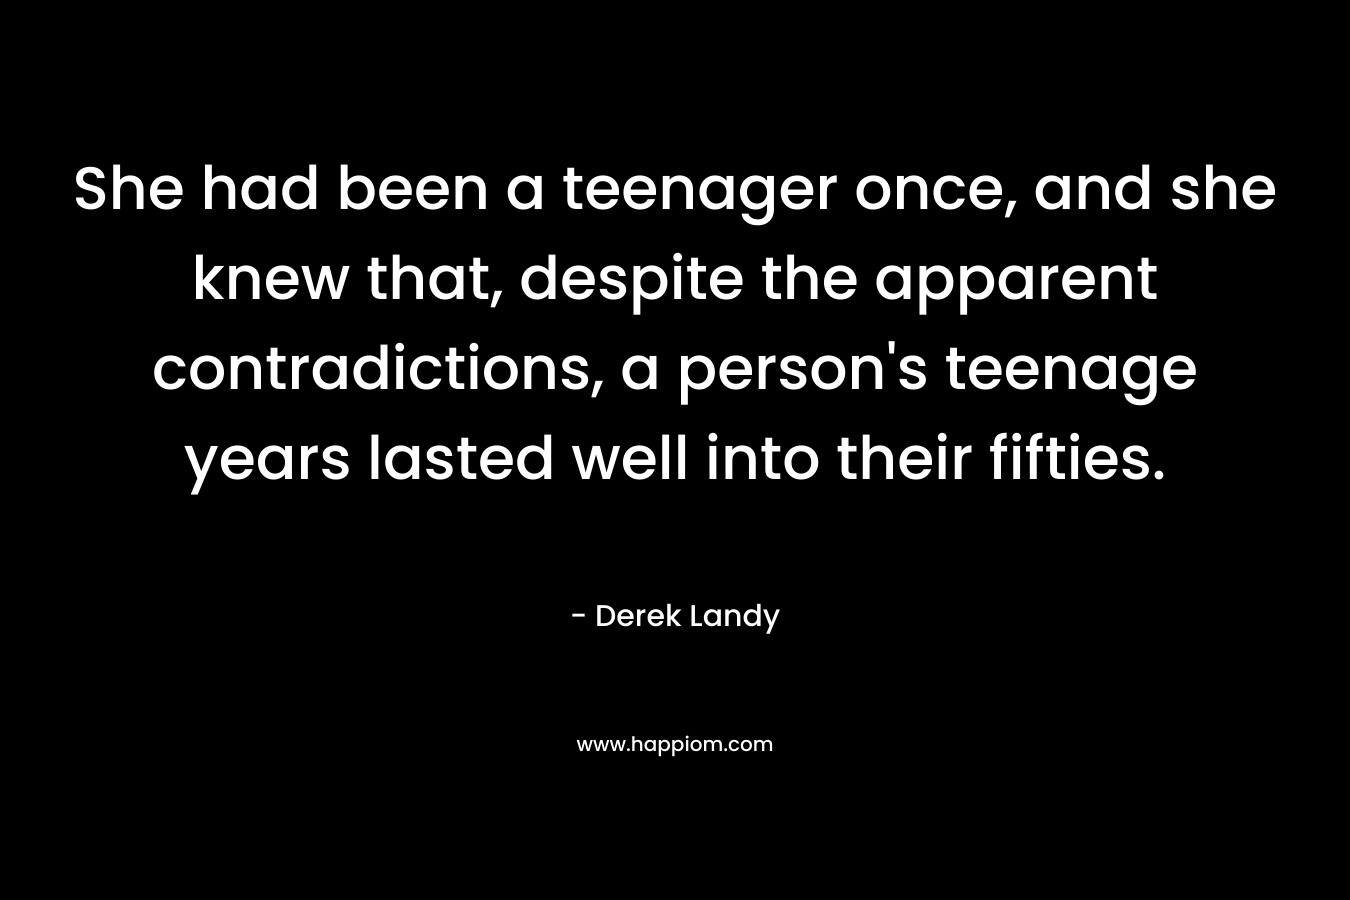 She had been a teenager once, and she knew that, despite the apparent contradictions, a person’s teenage years lasted well into their fifties. – Derek Landy